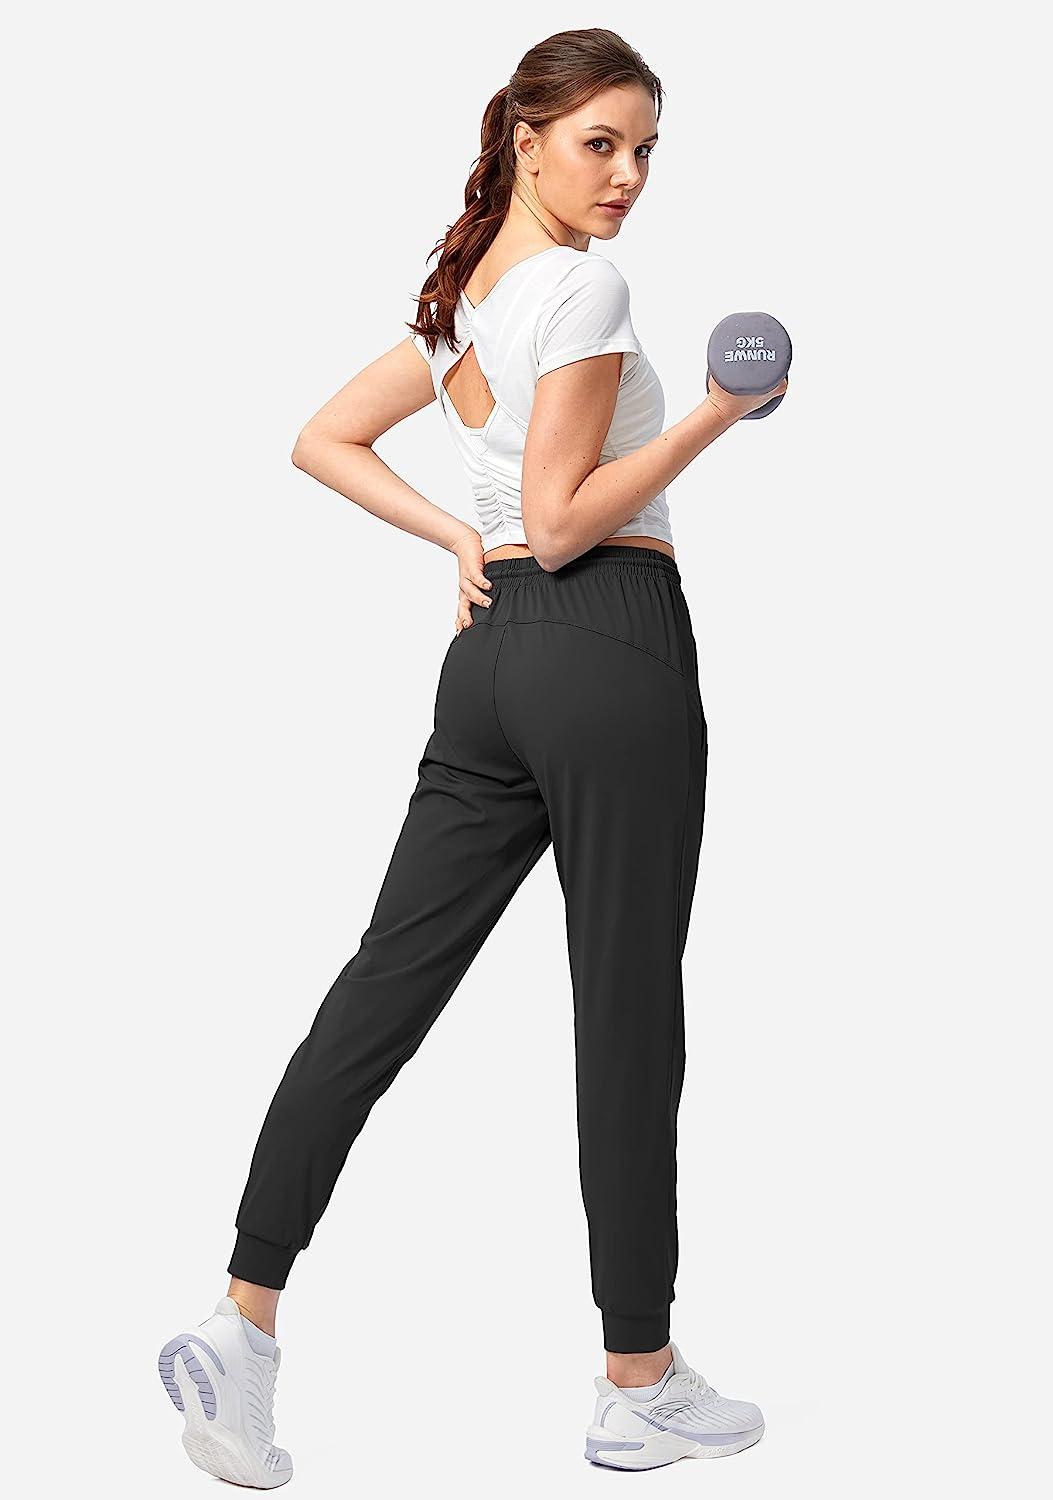  G Gradual Women's Joggers Pants with Zipper Pockets High Waisted  Athletic Tapered Sweatpants for Women Workout Lounge (Black, X-Small) :  Clothing, Shoes & Jewelry